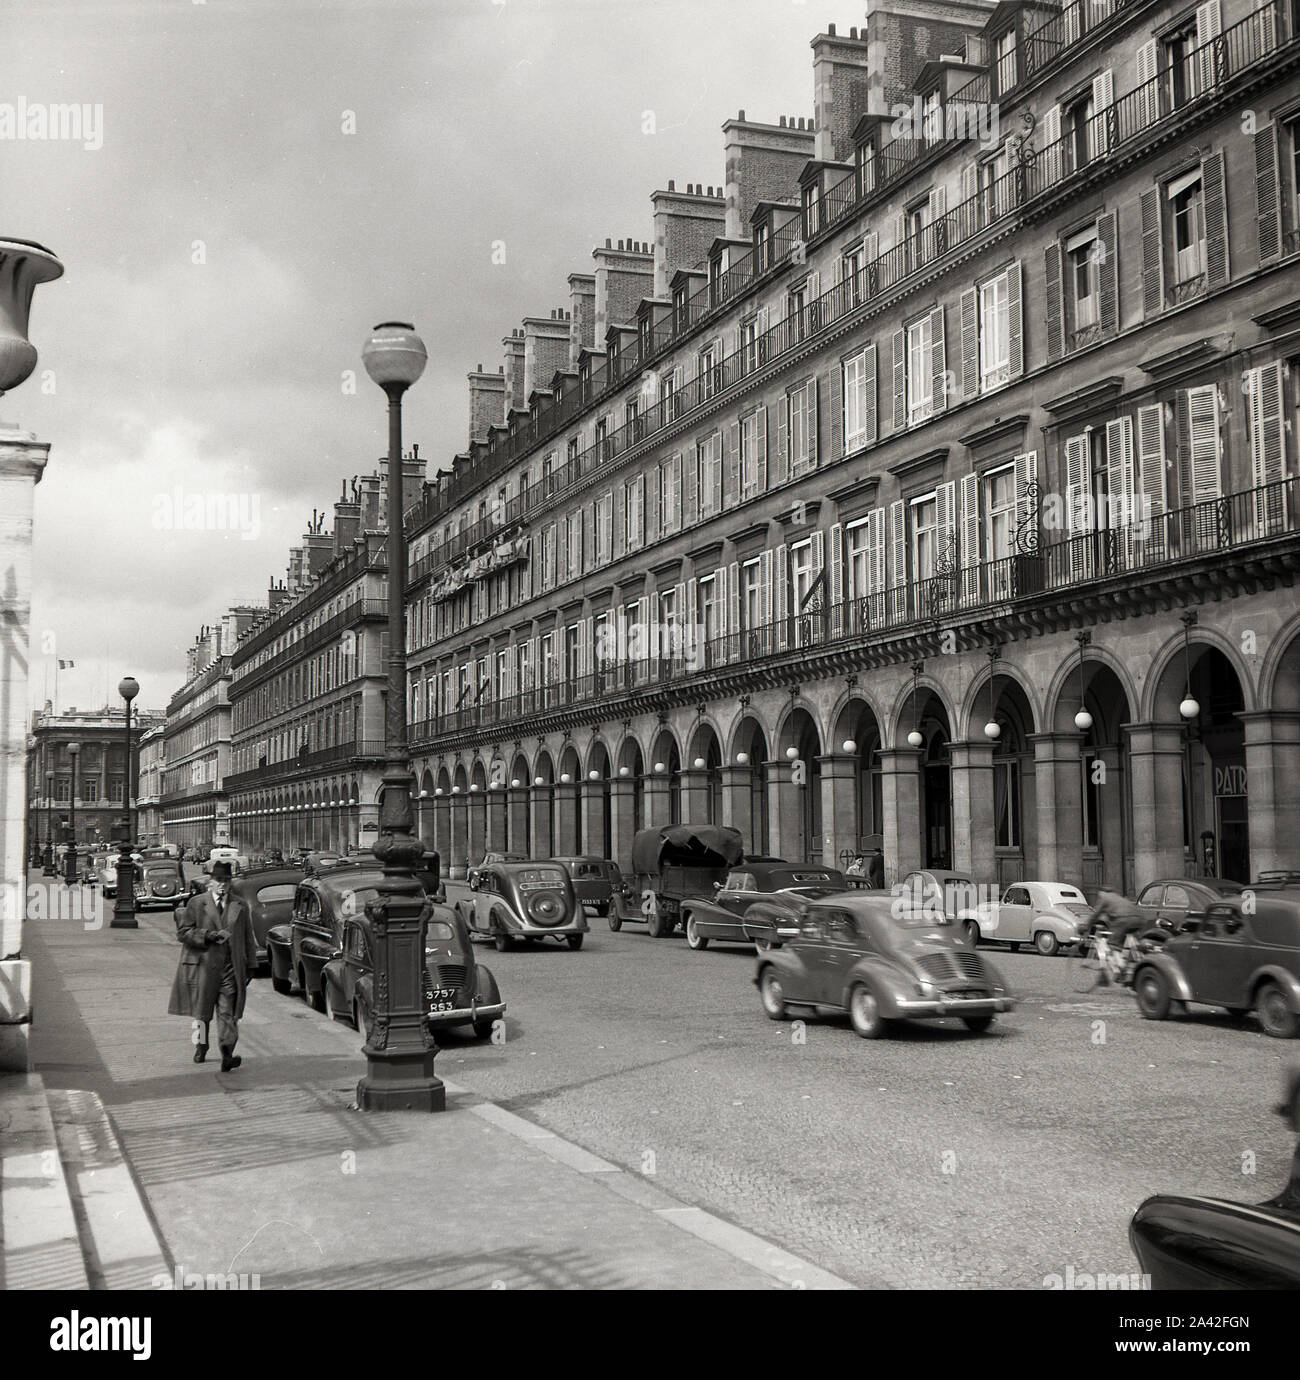 1950s, historical, motorcars of the era on the Rue de Rivoli, Paris, France, a famous street that runs along the north wing of the Louvre Palace and with its exterior arched facade at ground level. Stock Photo